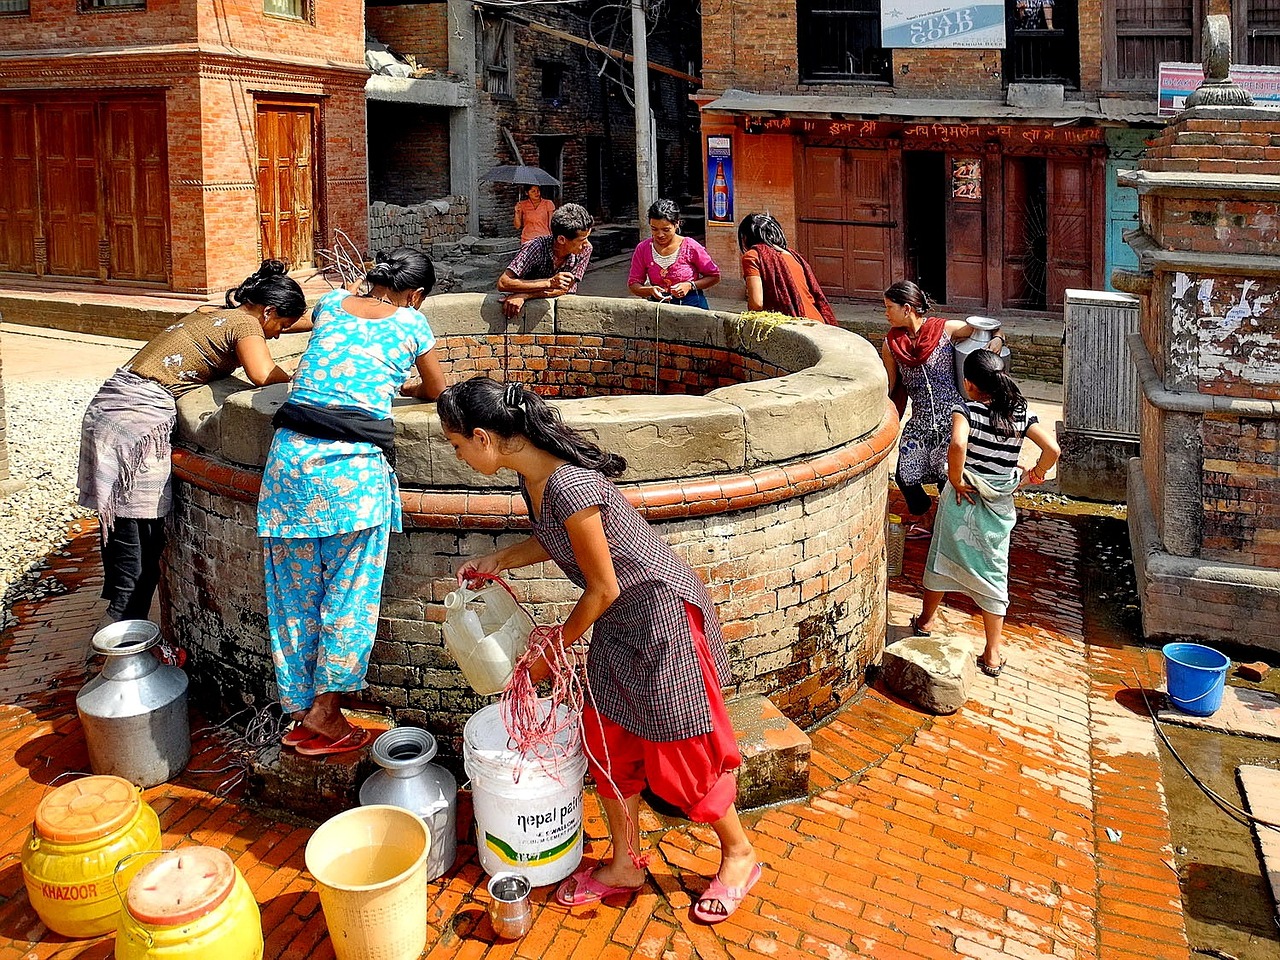 Women taking water out of a well in the middle of a neighborhood | volunteer in nepal 